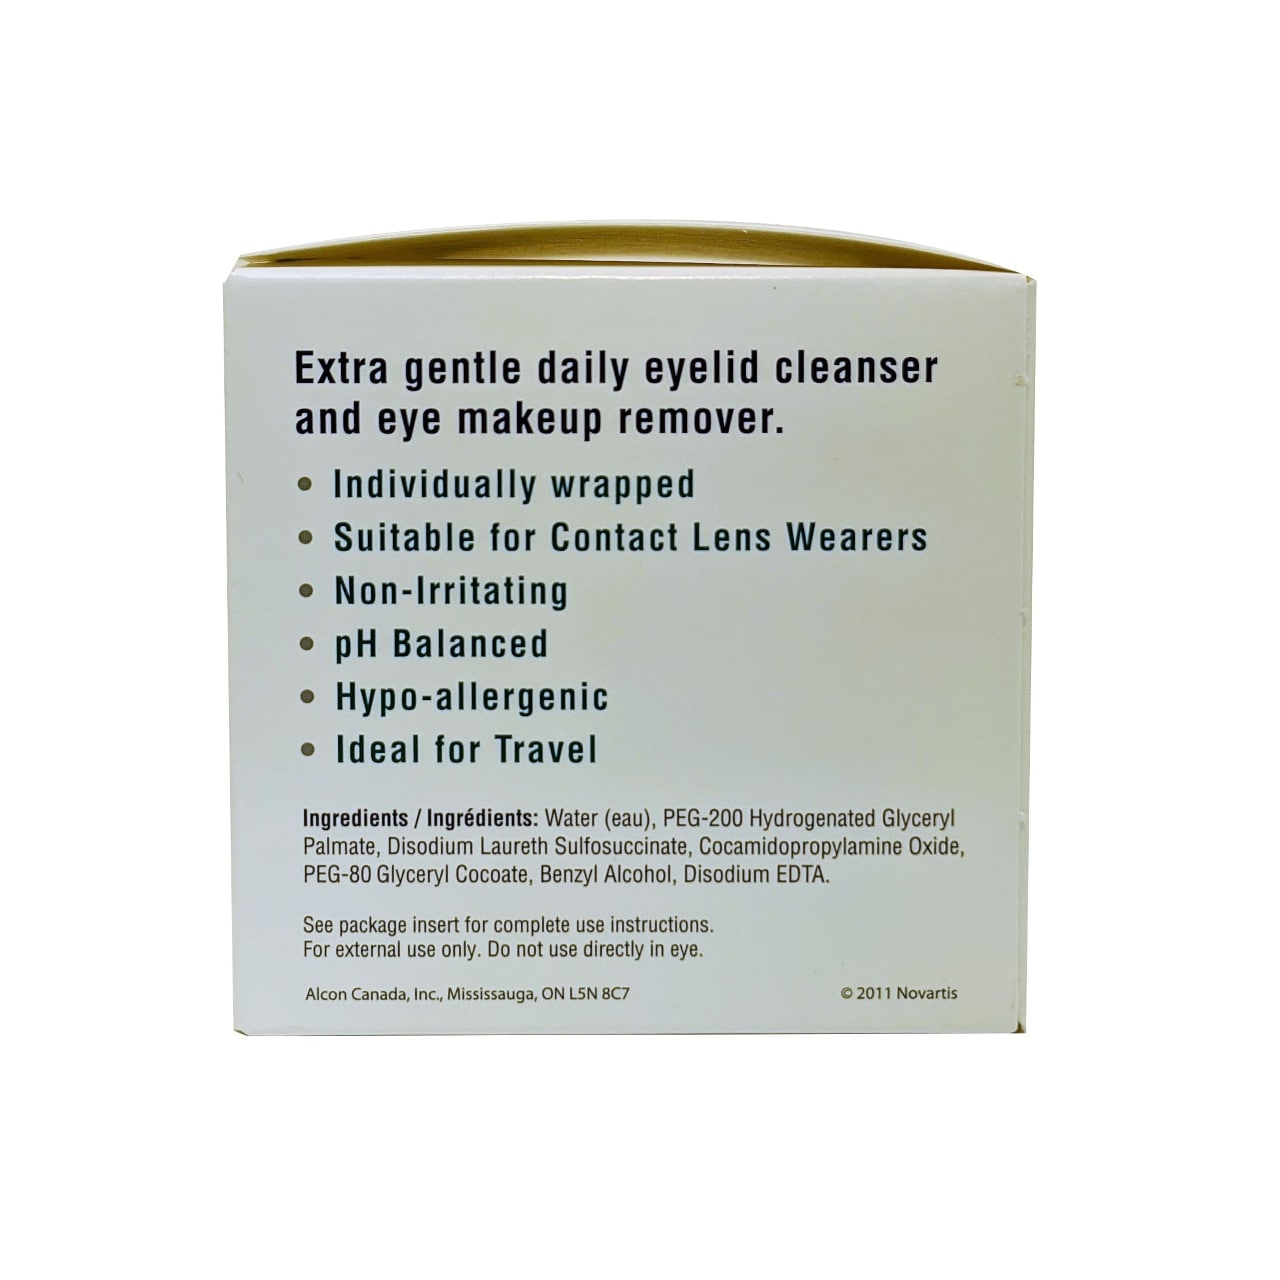 Package details and ingredients for Alcon Lid-Care Towelettes in English